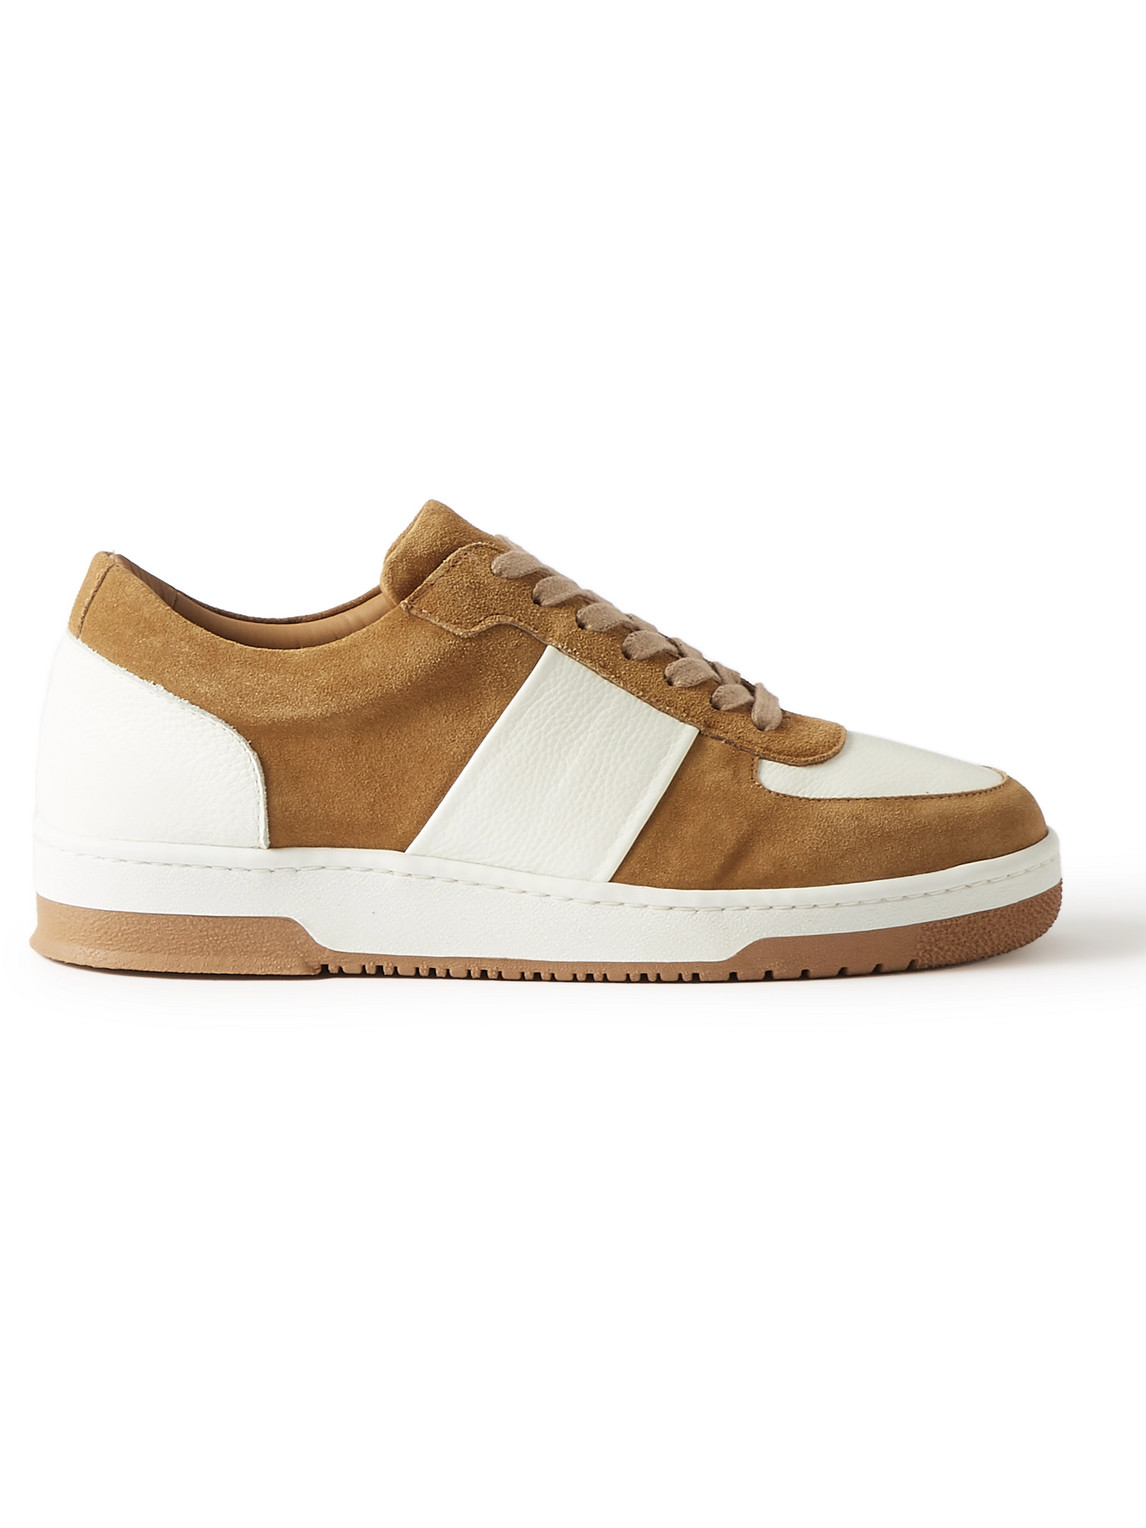 Mr P Atticus Suede And Pebble-grain Leather Sneakers In Brown